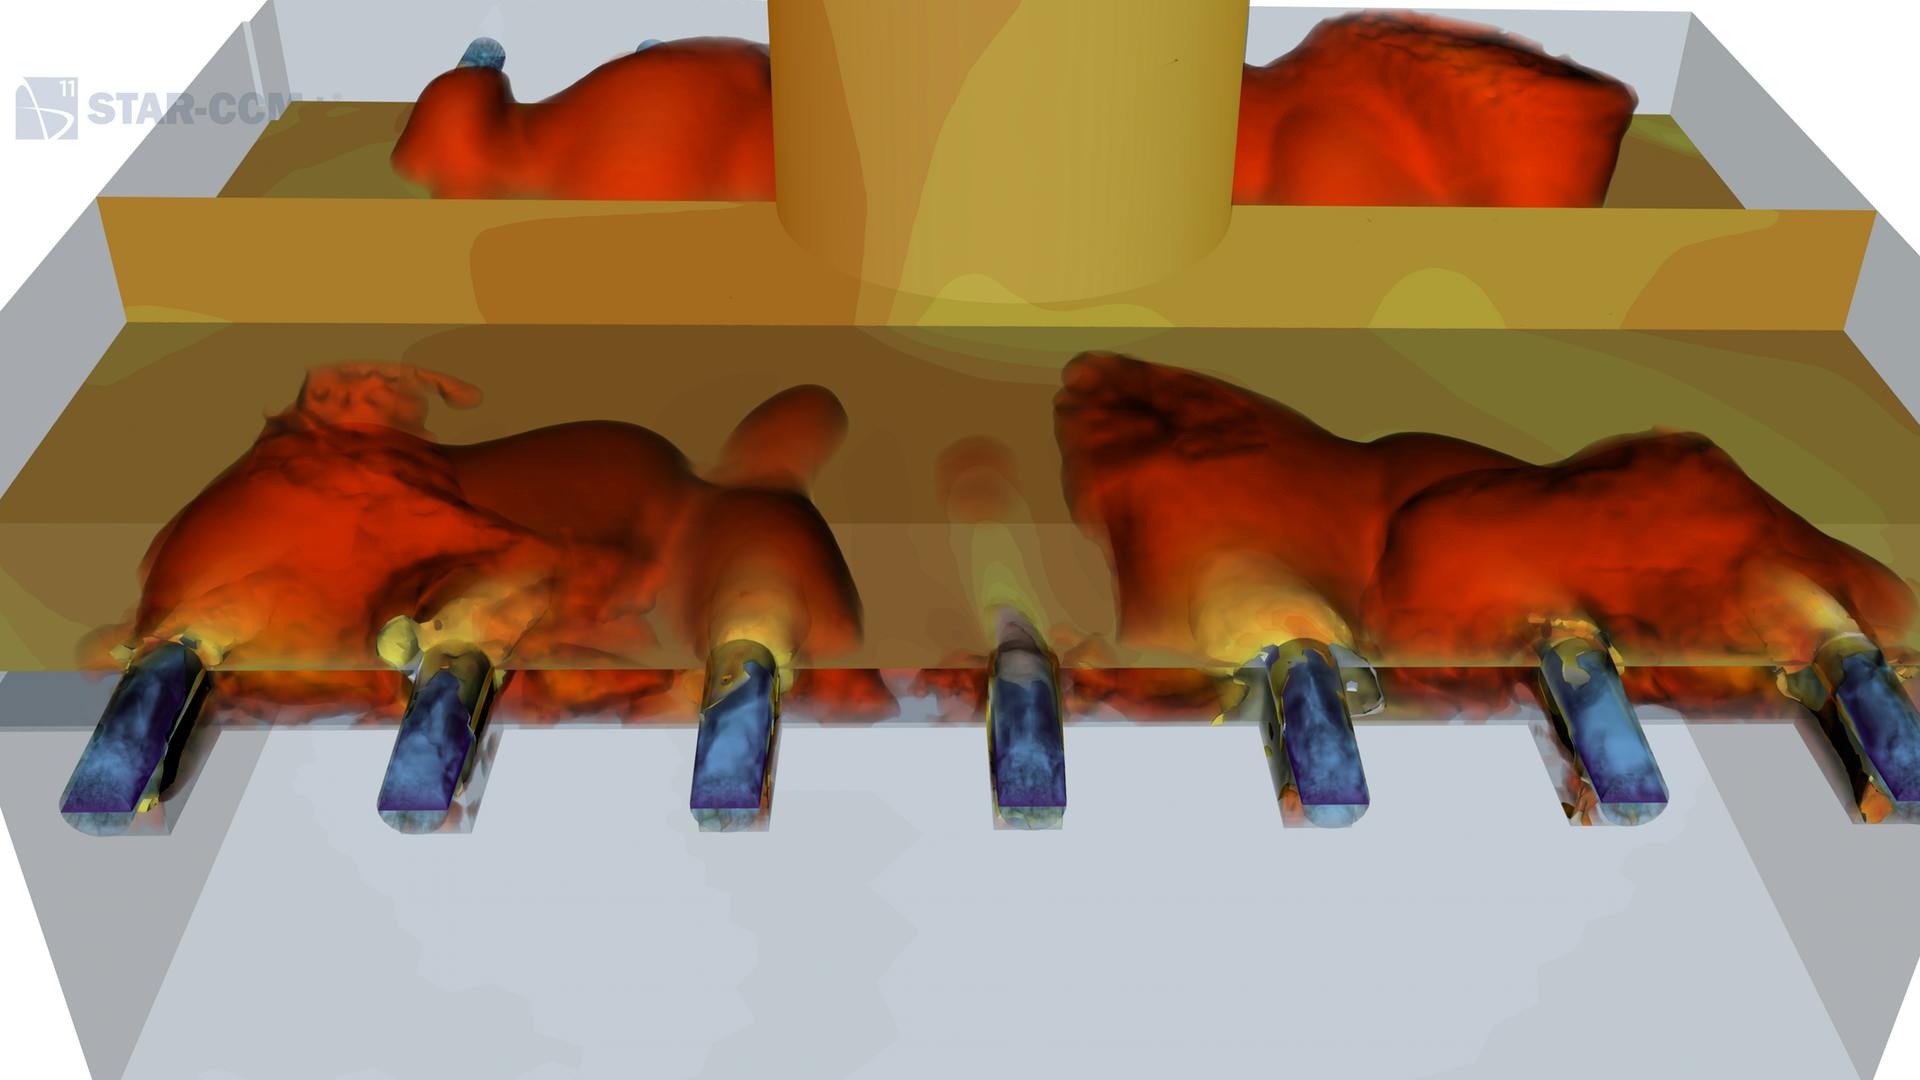 Design and optimize high temperature and combustion processes using simulation